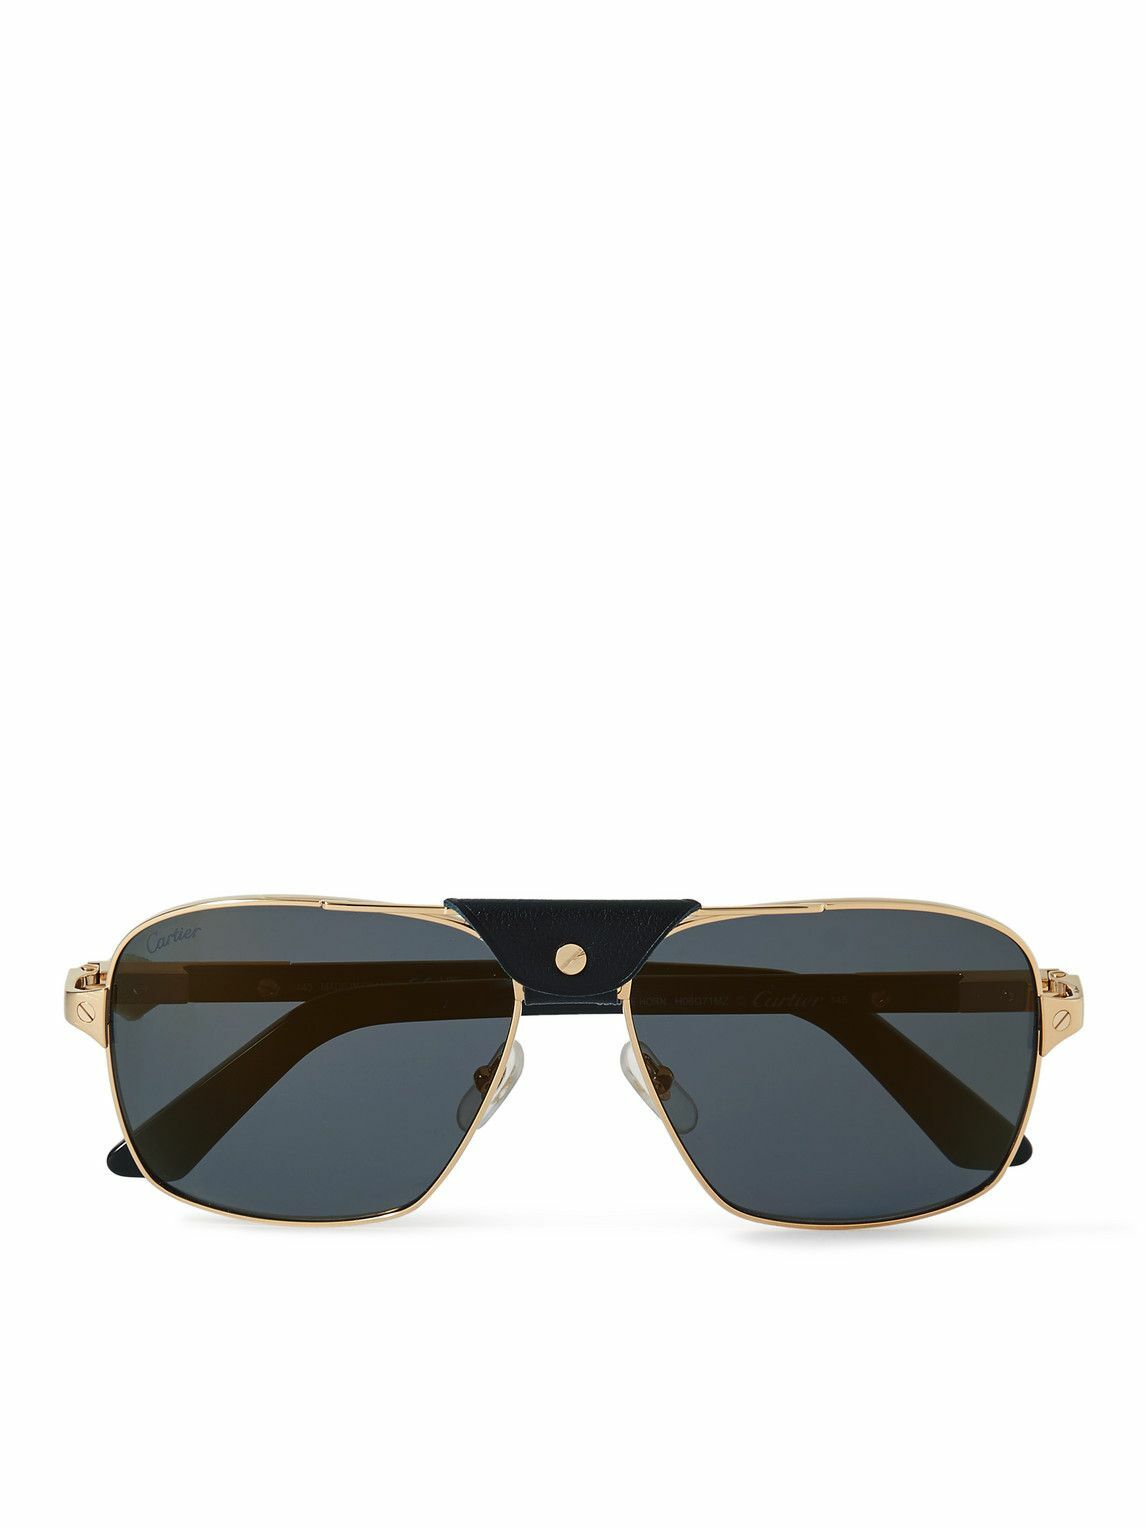 Cartier Eyewear Aviator Style Leather Trimmed Gold Tone And Acetate Sunglasses Cartier